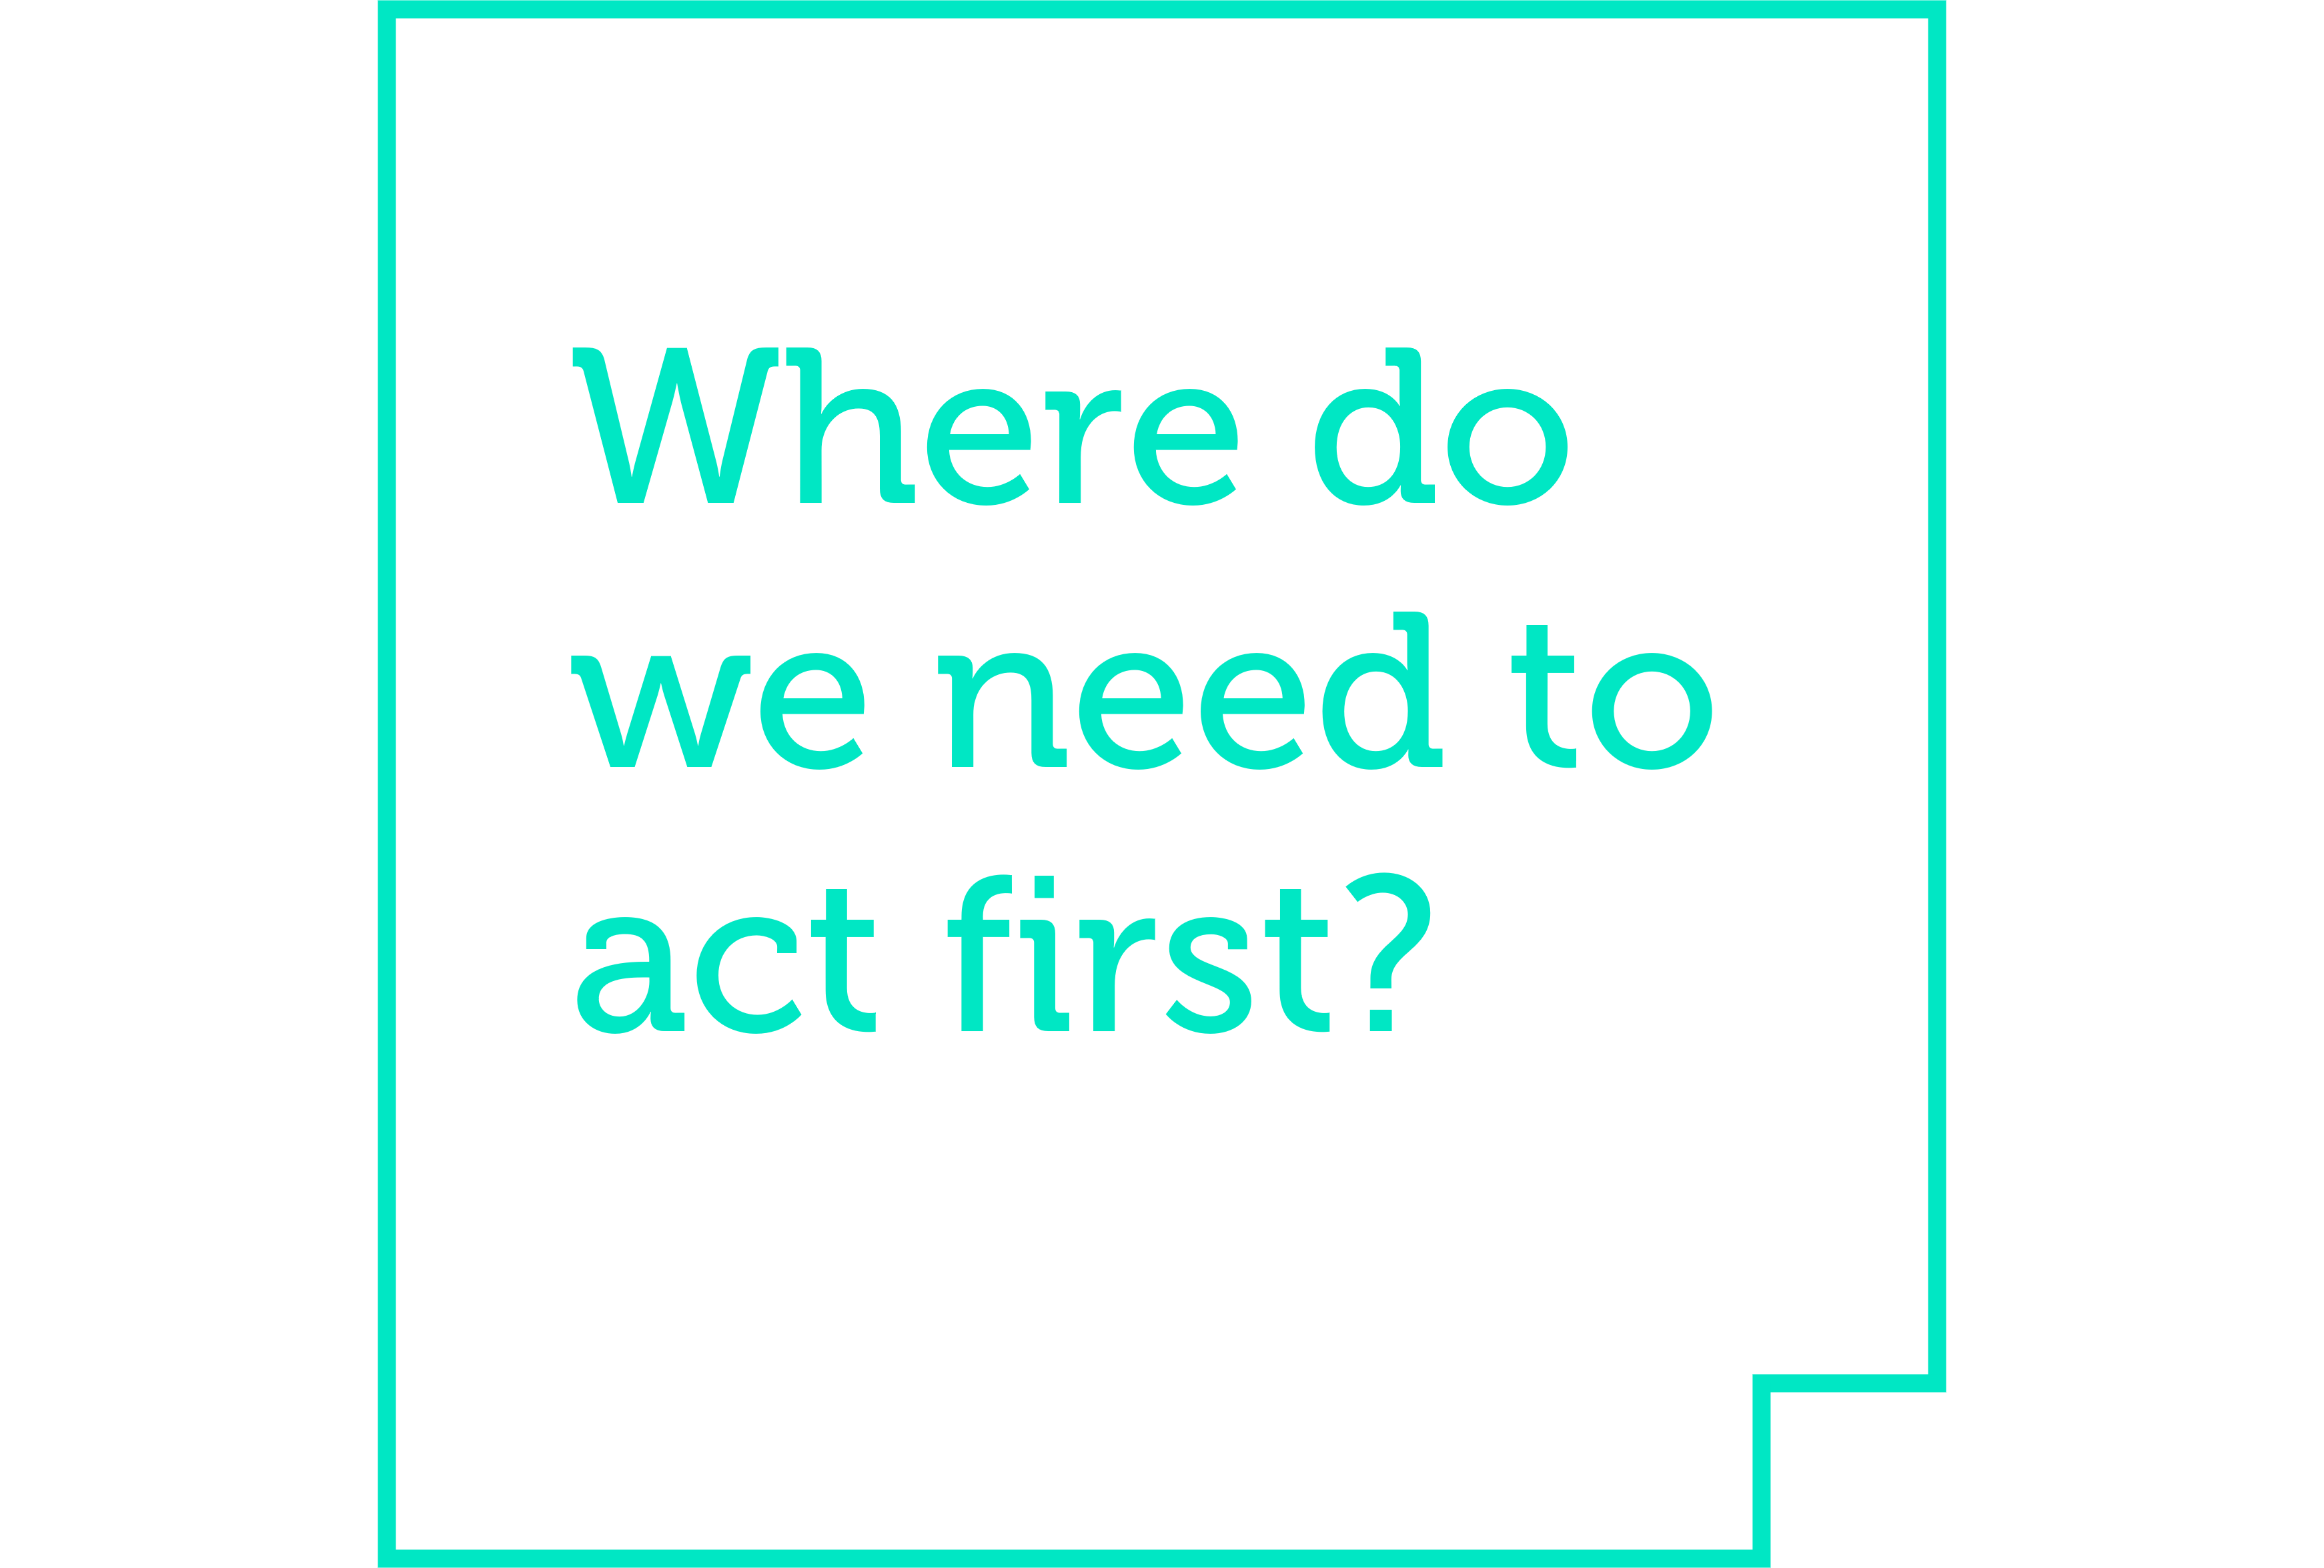 Axon - Where do we need to act first?